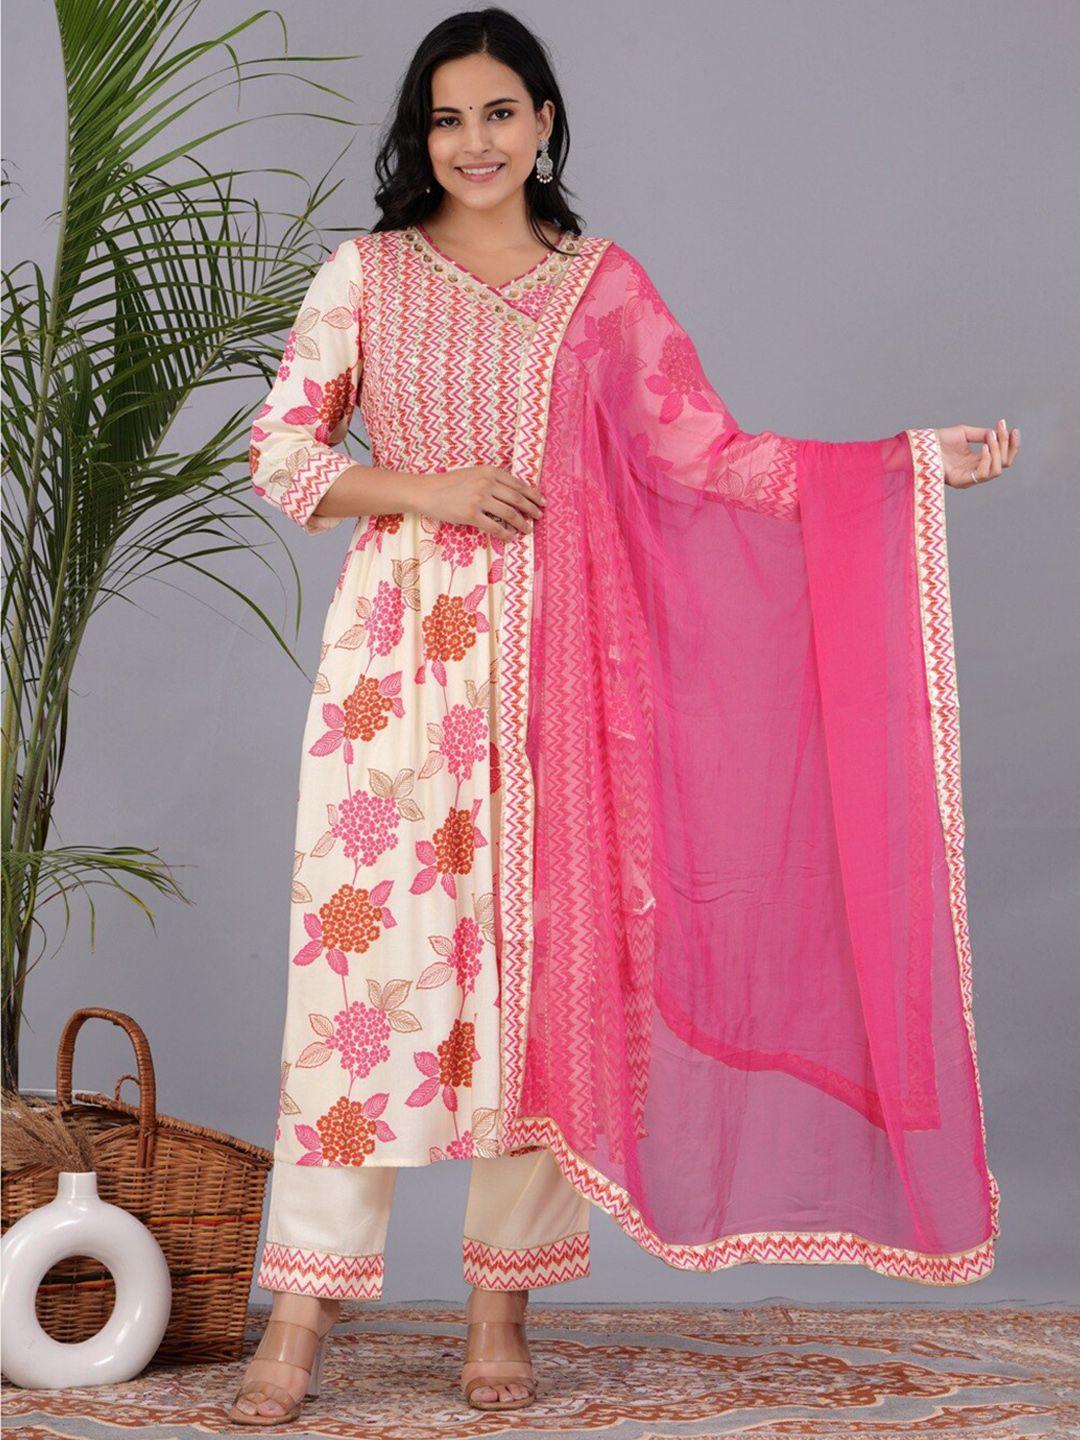 unisets-floral-embroidered-angrakha-kurta-with-trousers-&-dupatta